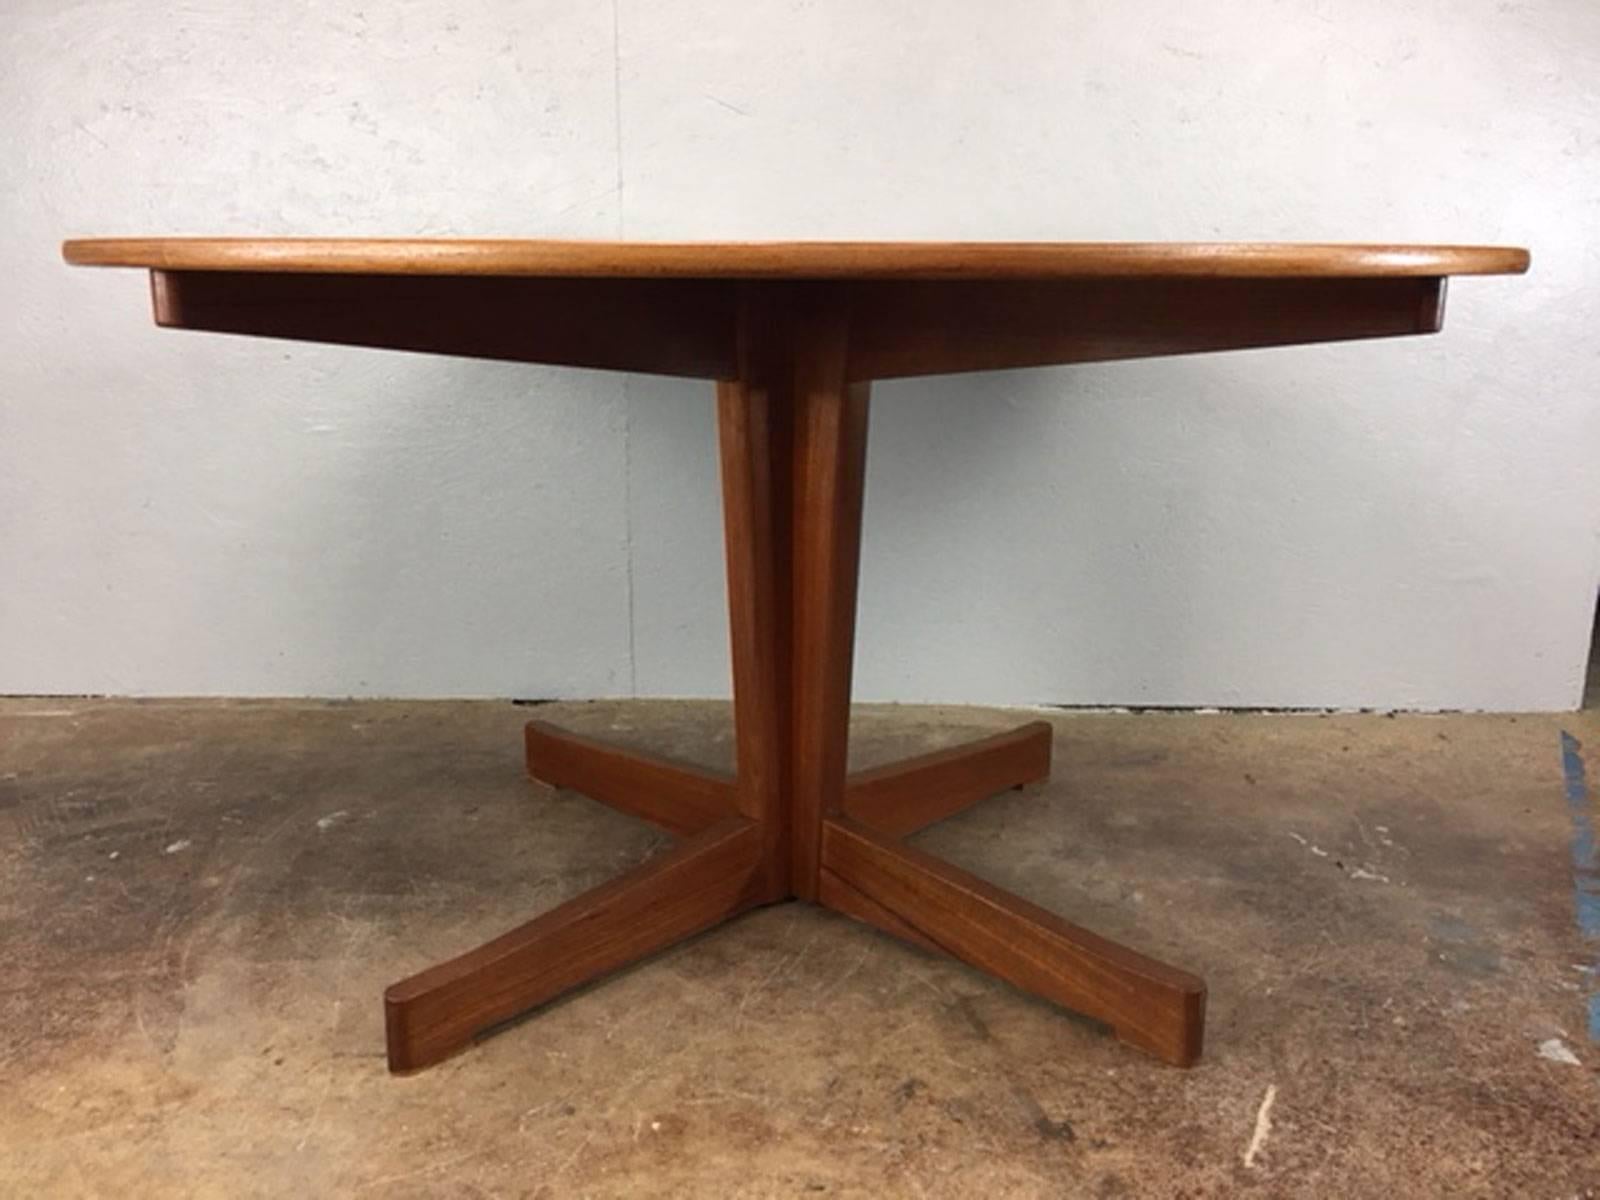 Very high quality round teak dining table on a four star base. Original excellent condition. Superb graining. Attractive table.